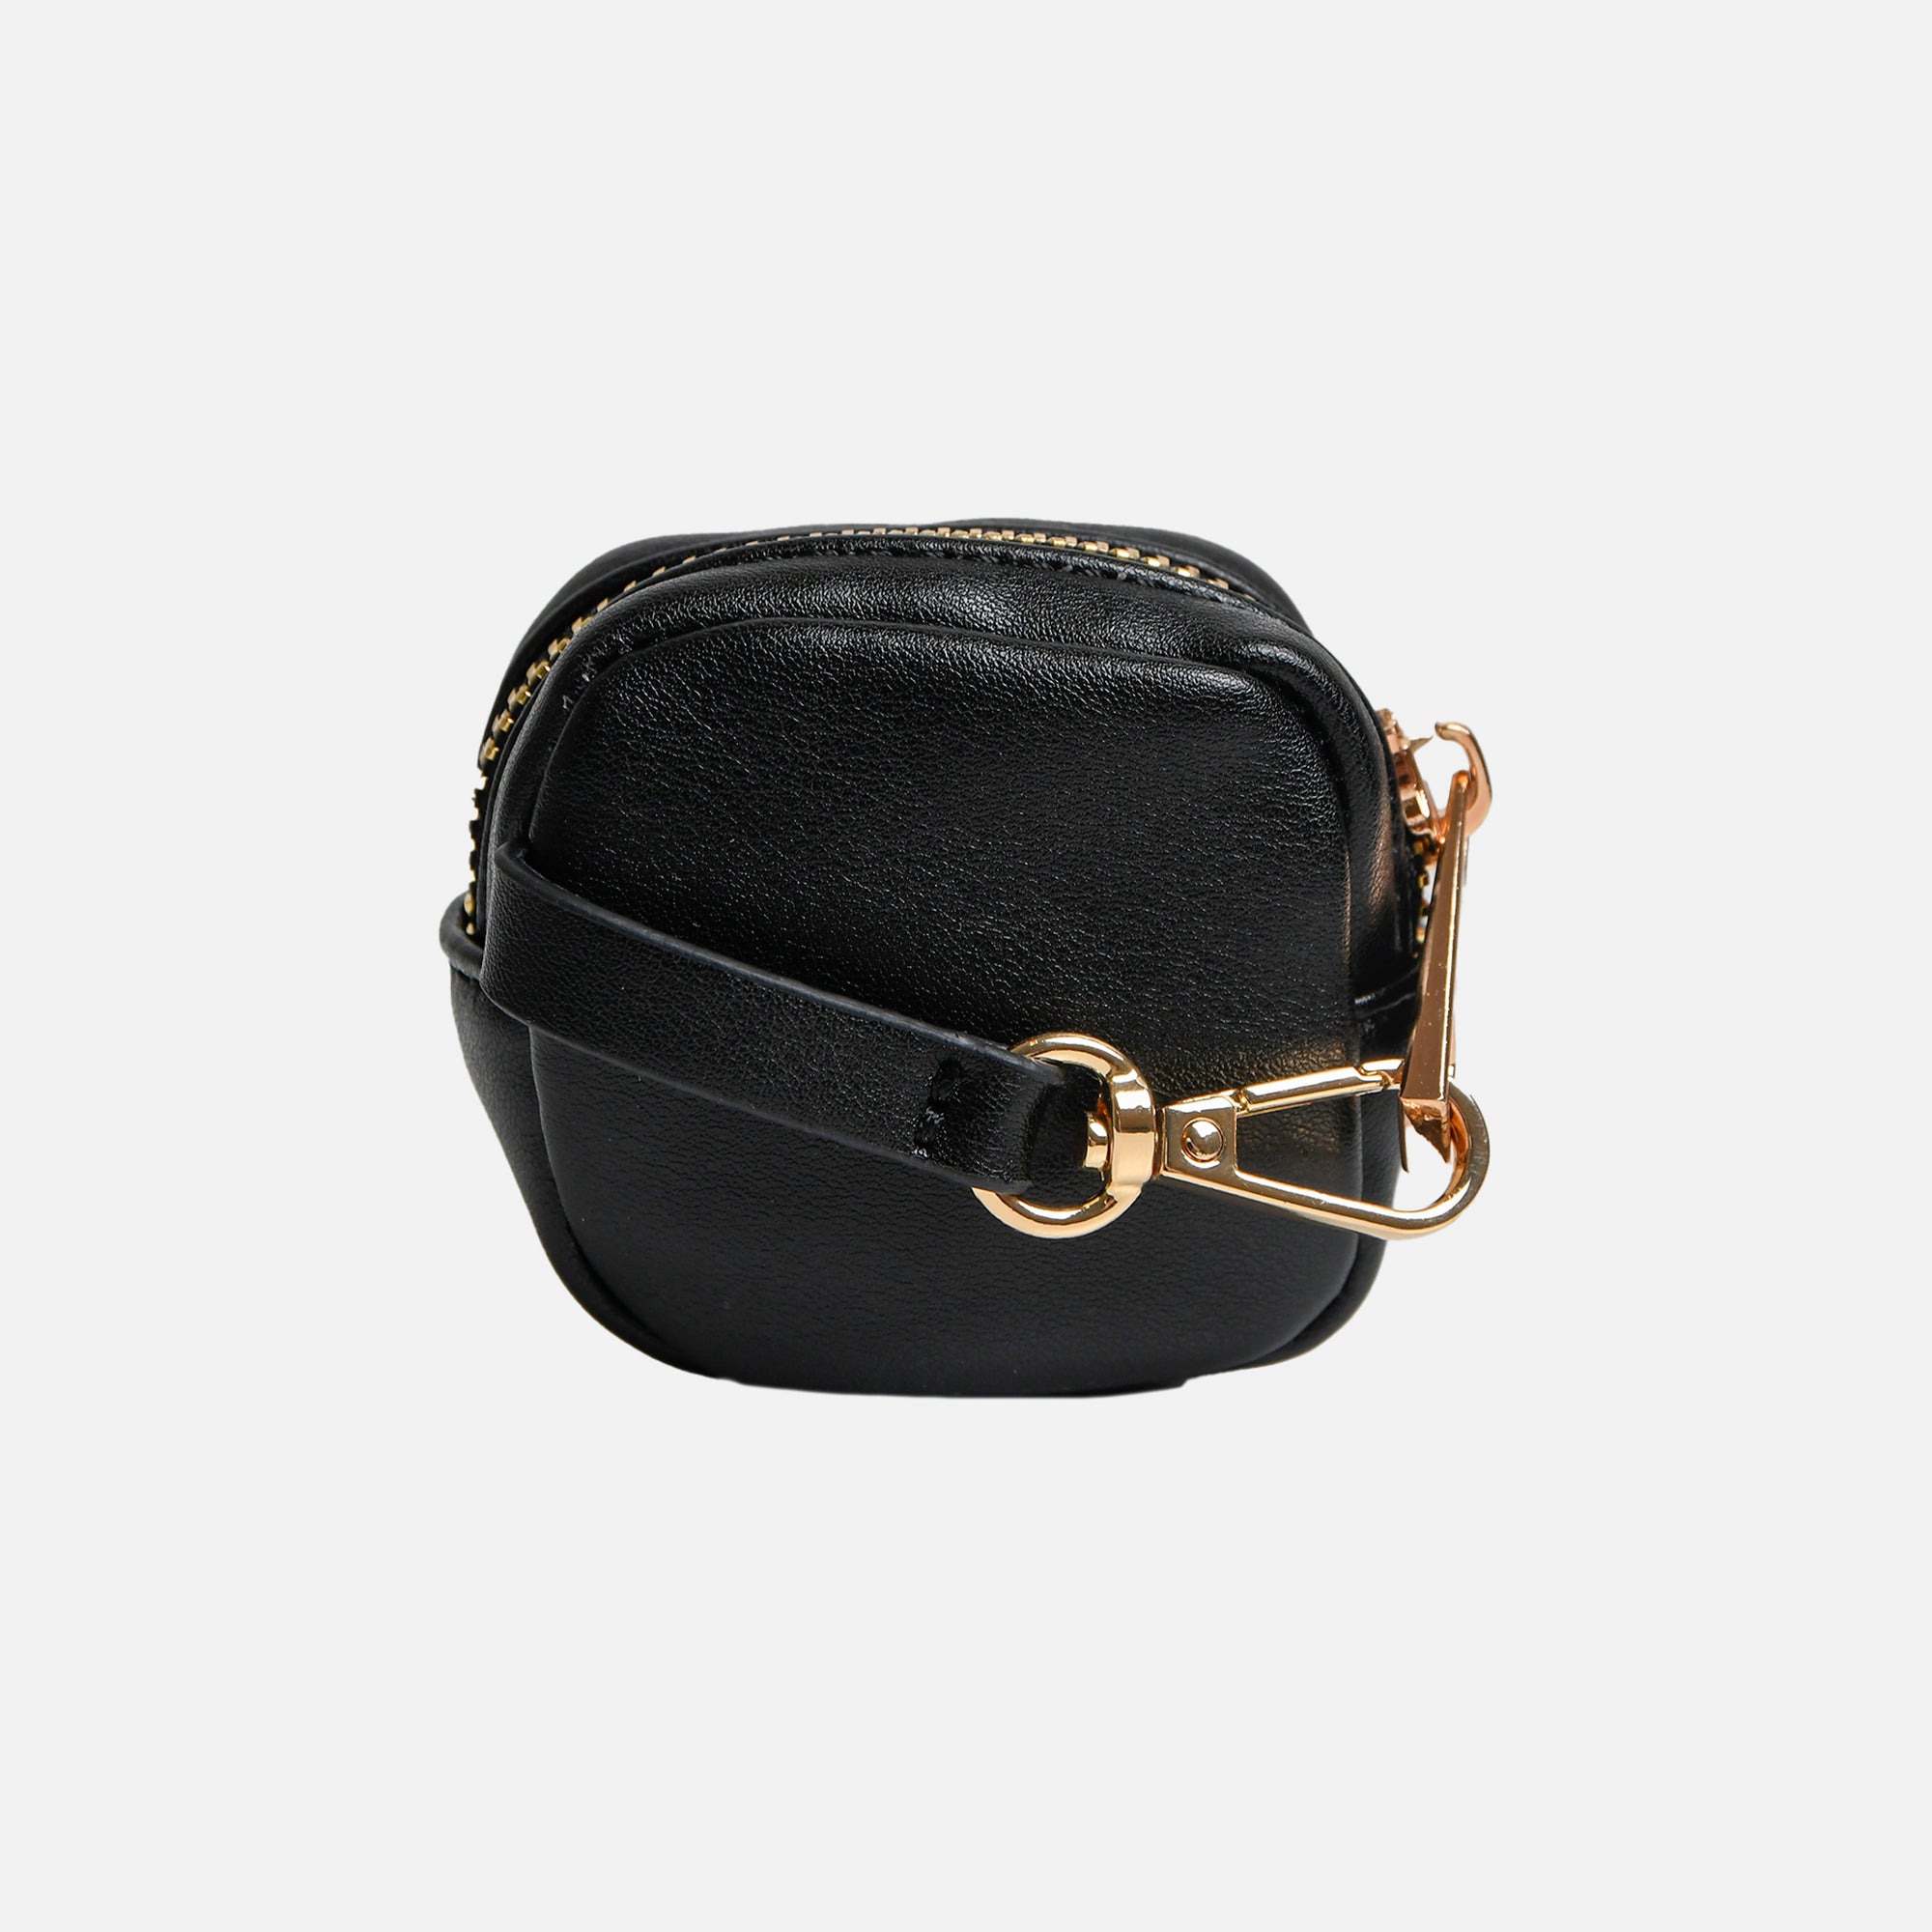 Small black pouch with zipper